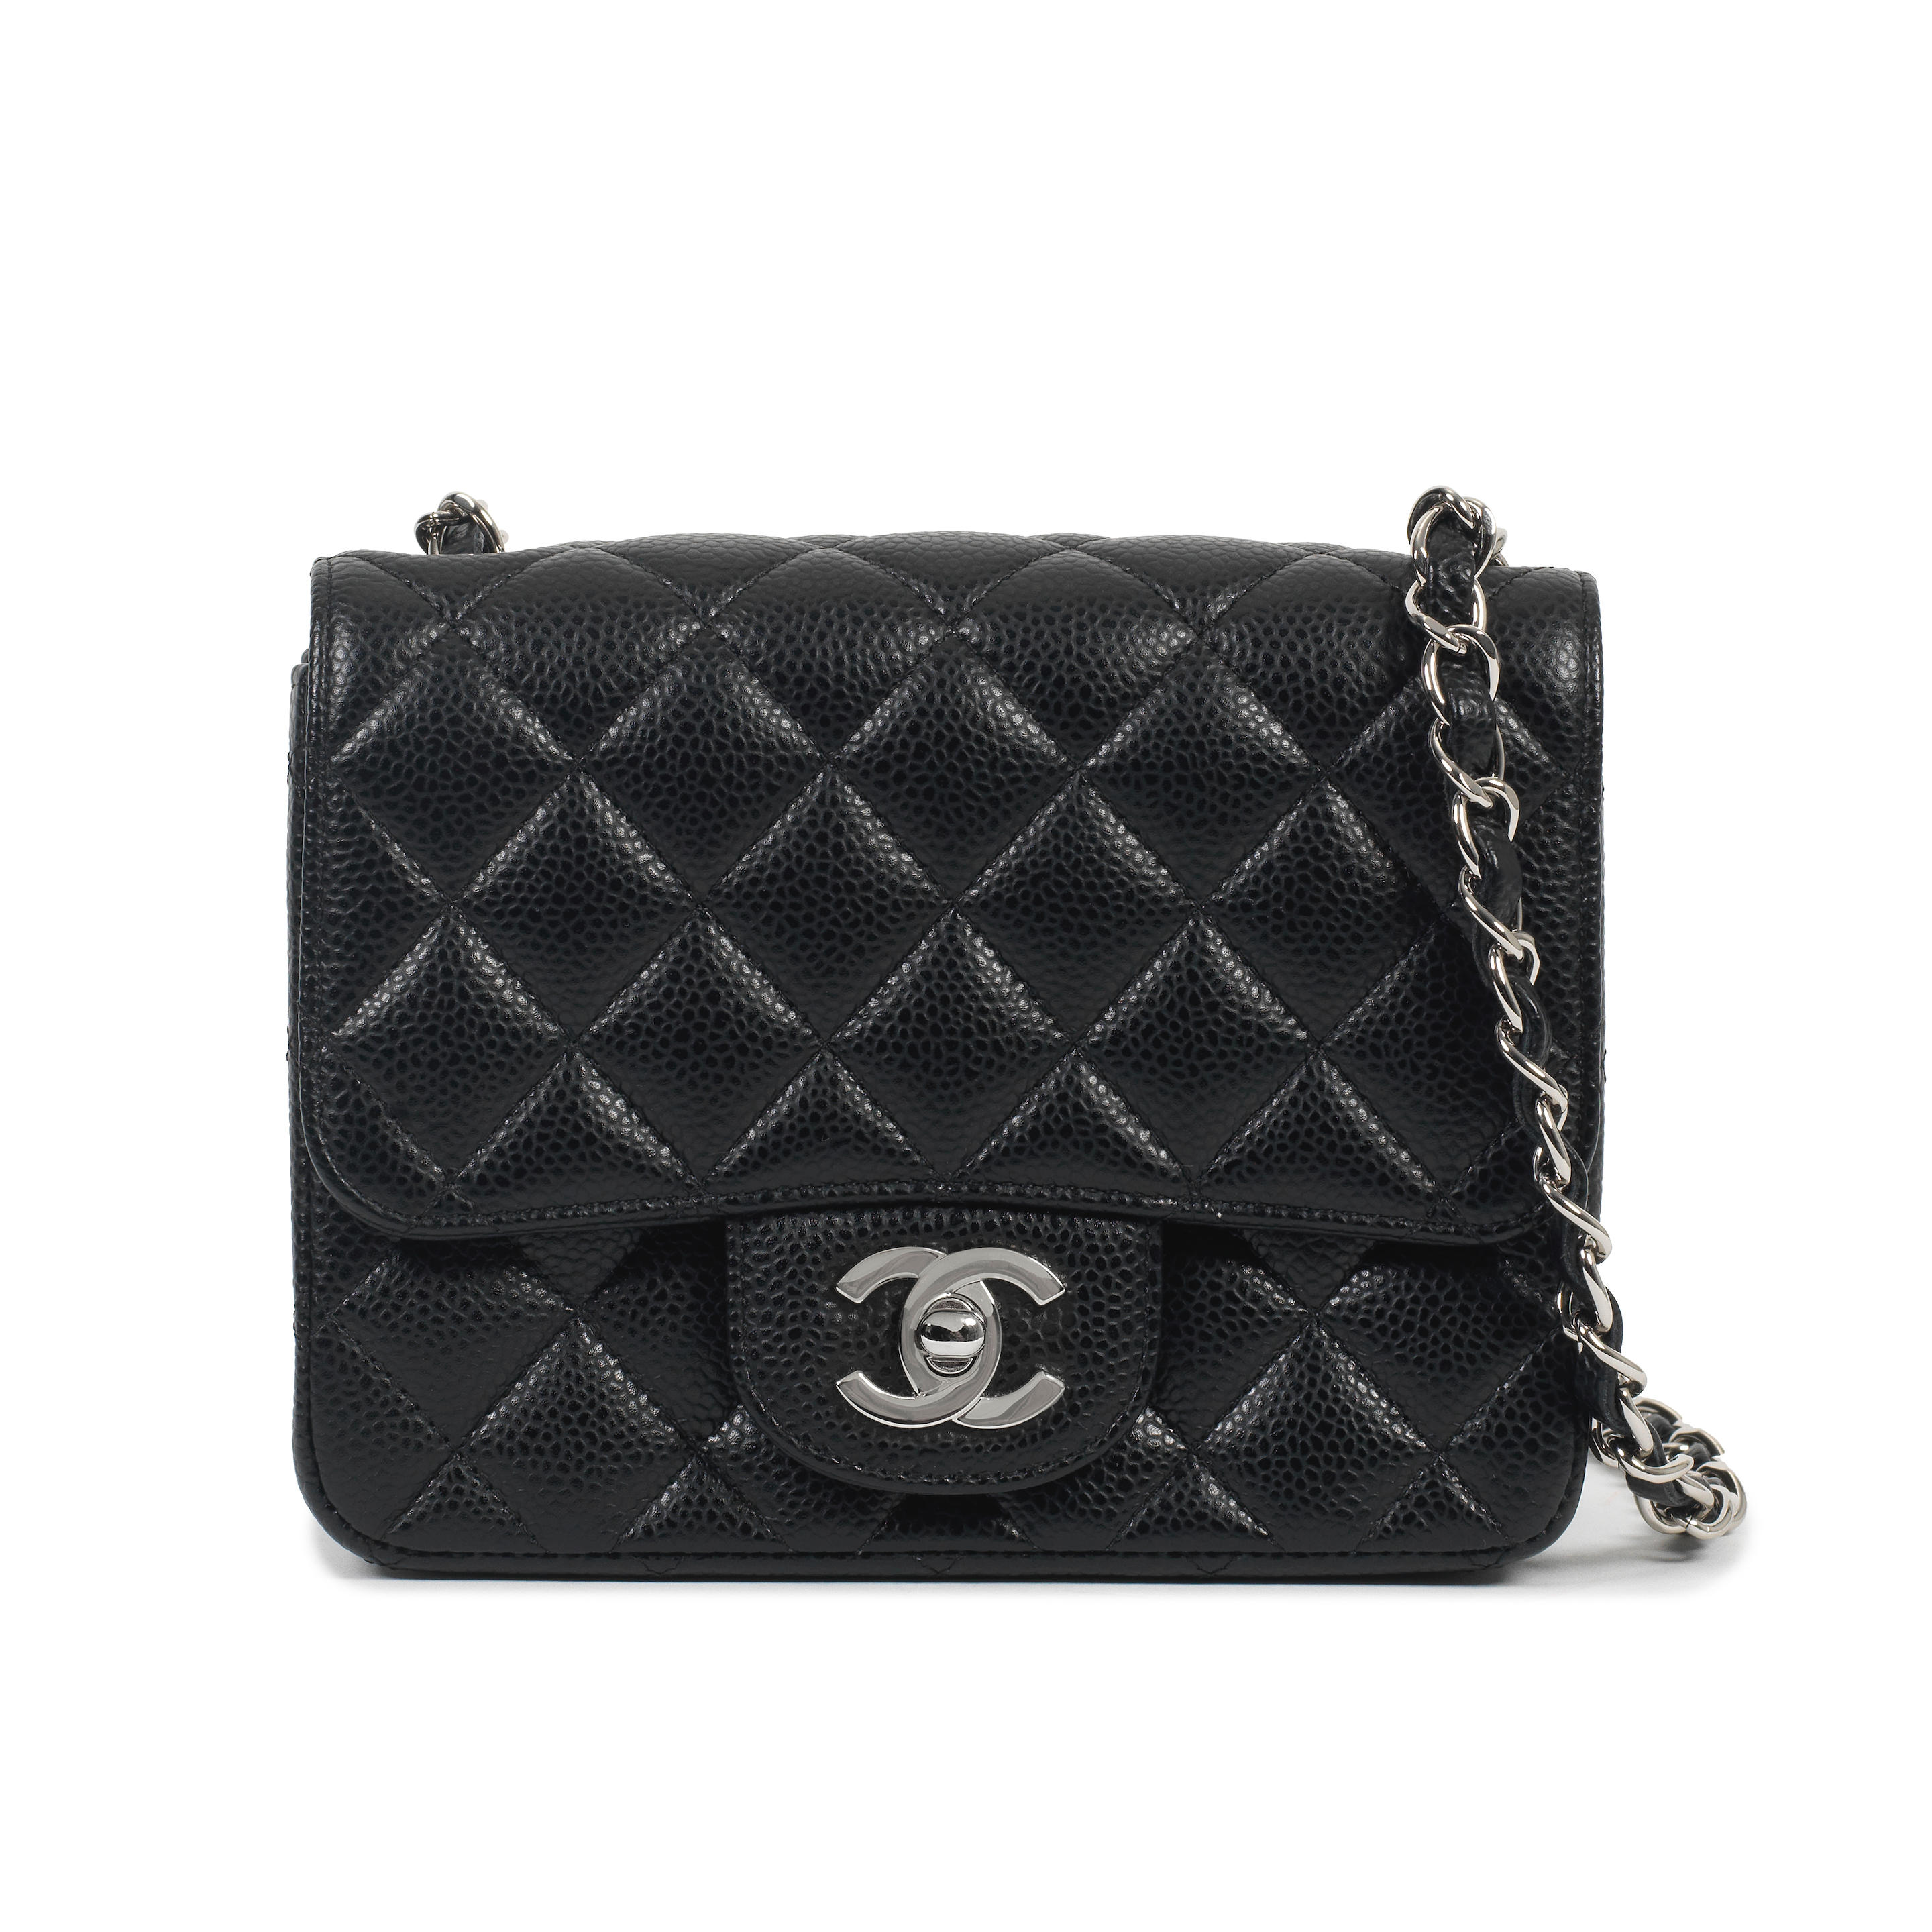 Bonhams : CHANEL BLACK LAMBSKIN SMALL VANITY CASE WITH TOP HANDLE GOLD  TONED CHAIN (Includes info booklet, authenticity card, original dust bag  and original box)